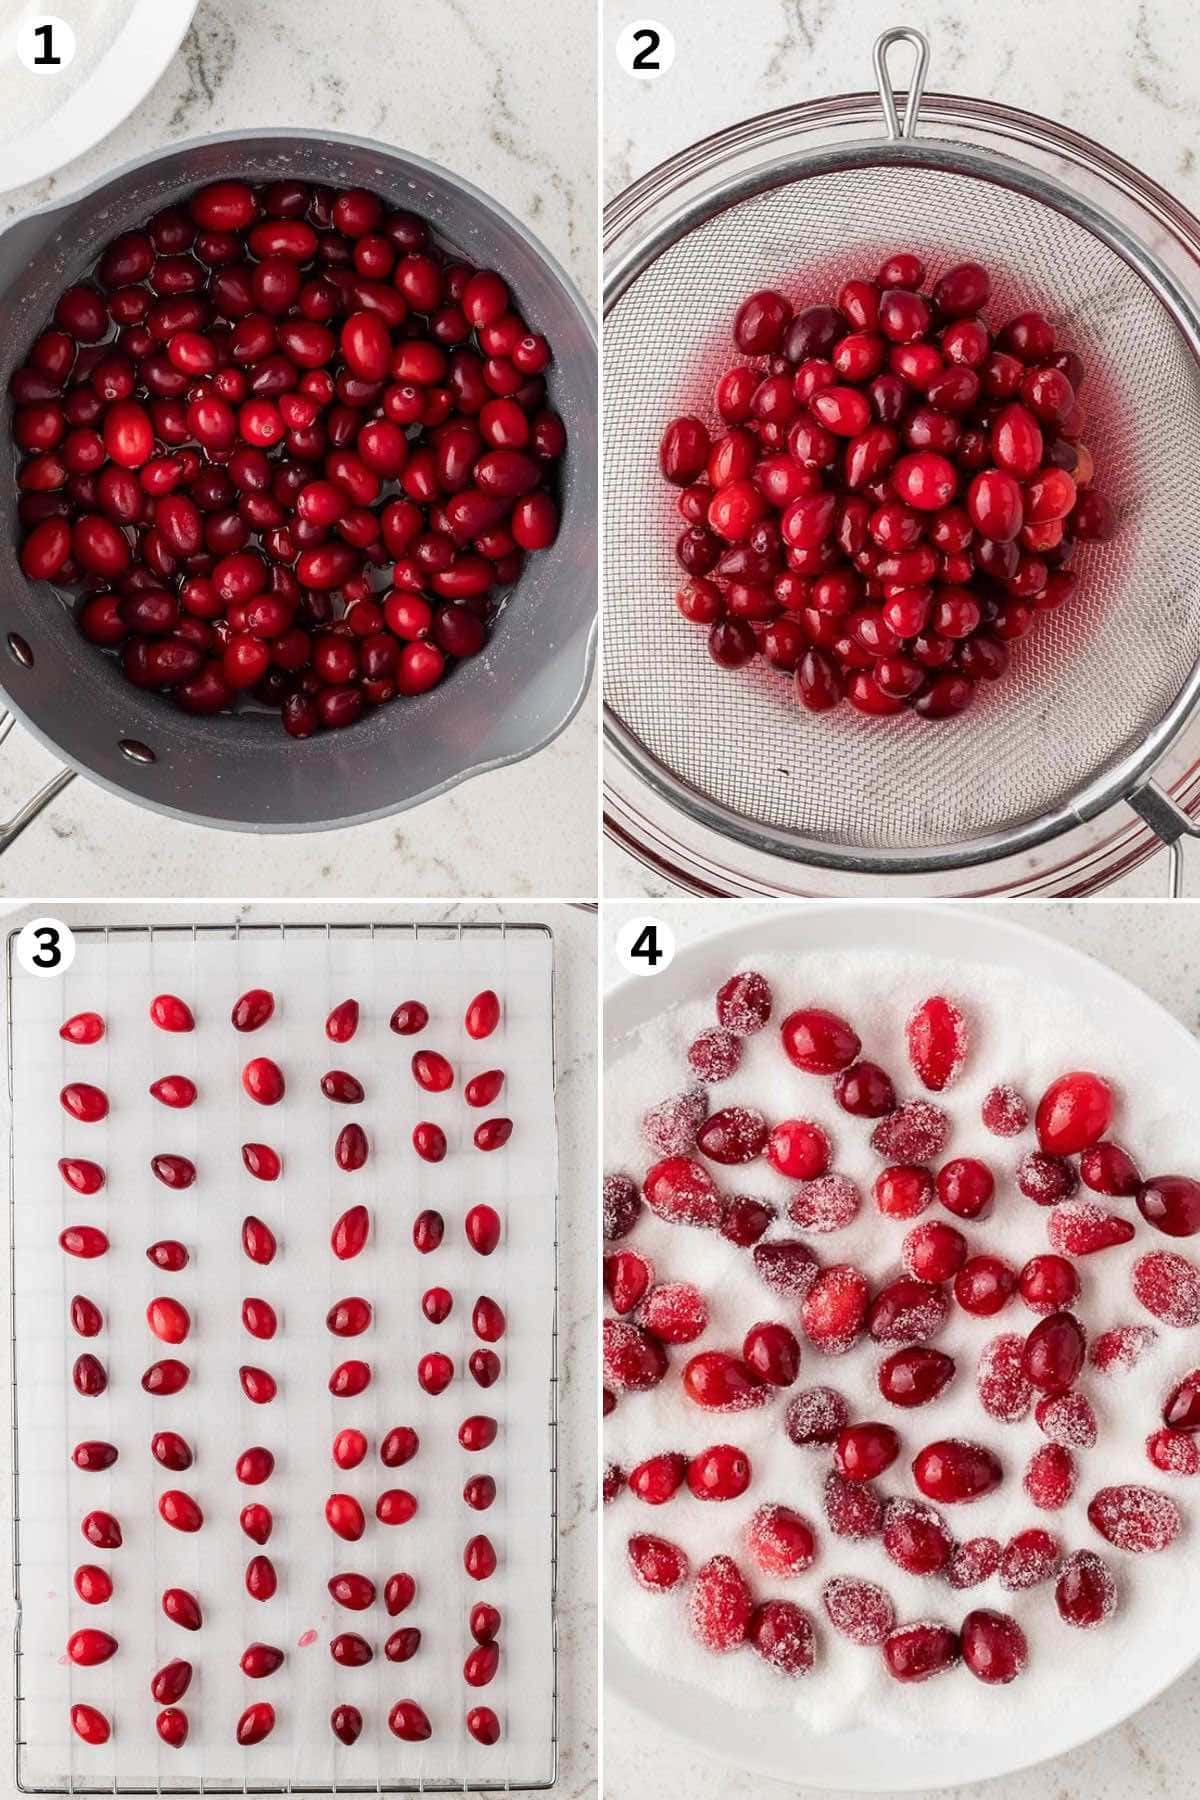 Coat cranberries in the sugar syrup. drain the cranberries. Place in parchment paper. coat in granulated sugar.